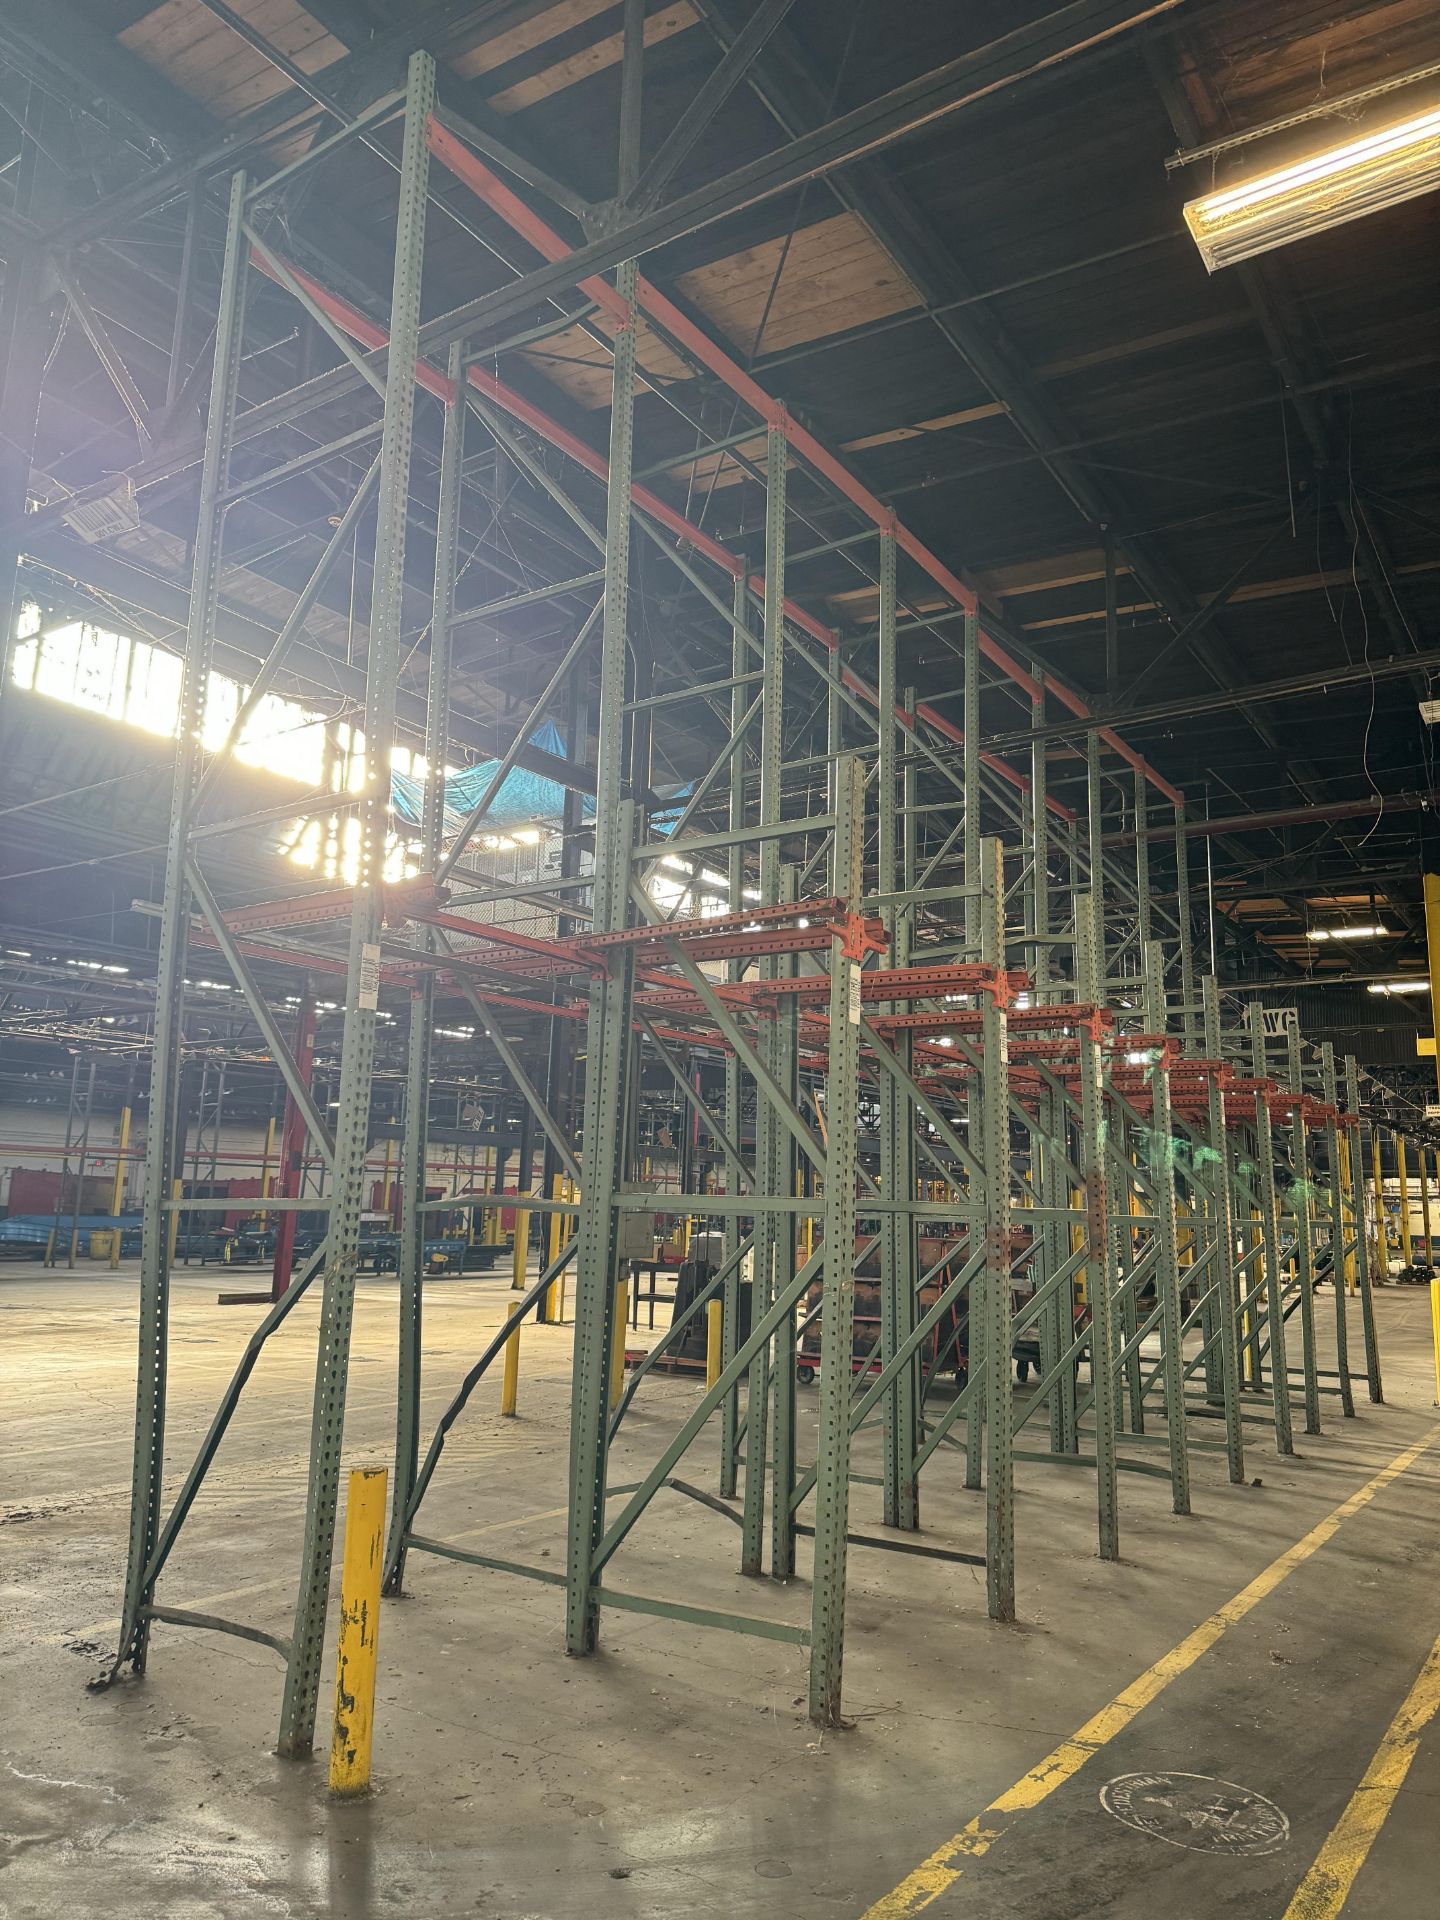 Pallet Racking, Qty 10 Uprights, Rigging/ Removal Fee - $700 - Image 2 of 3